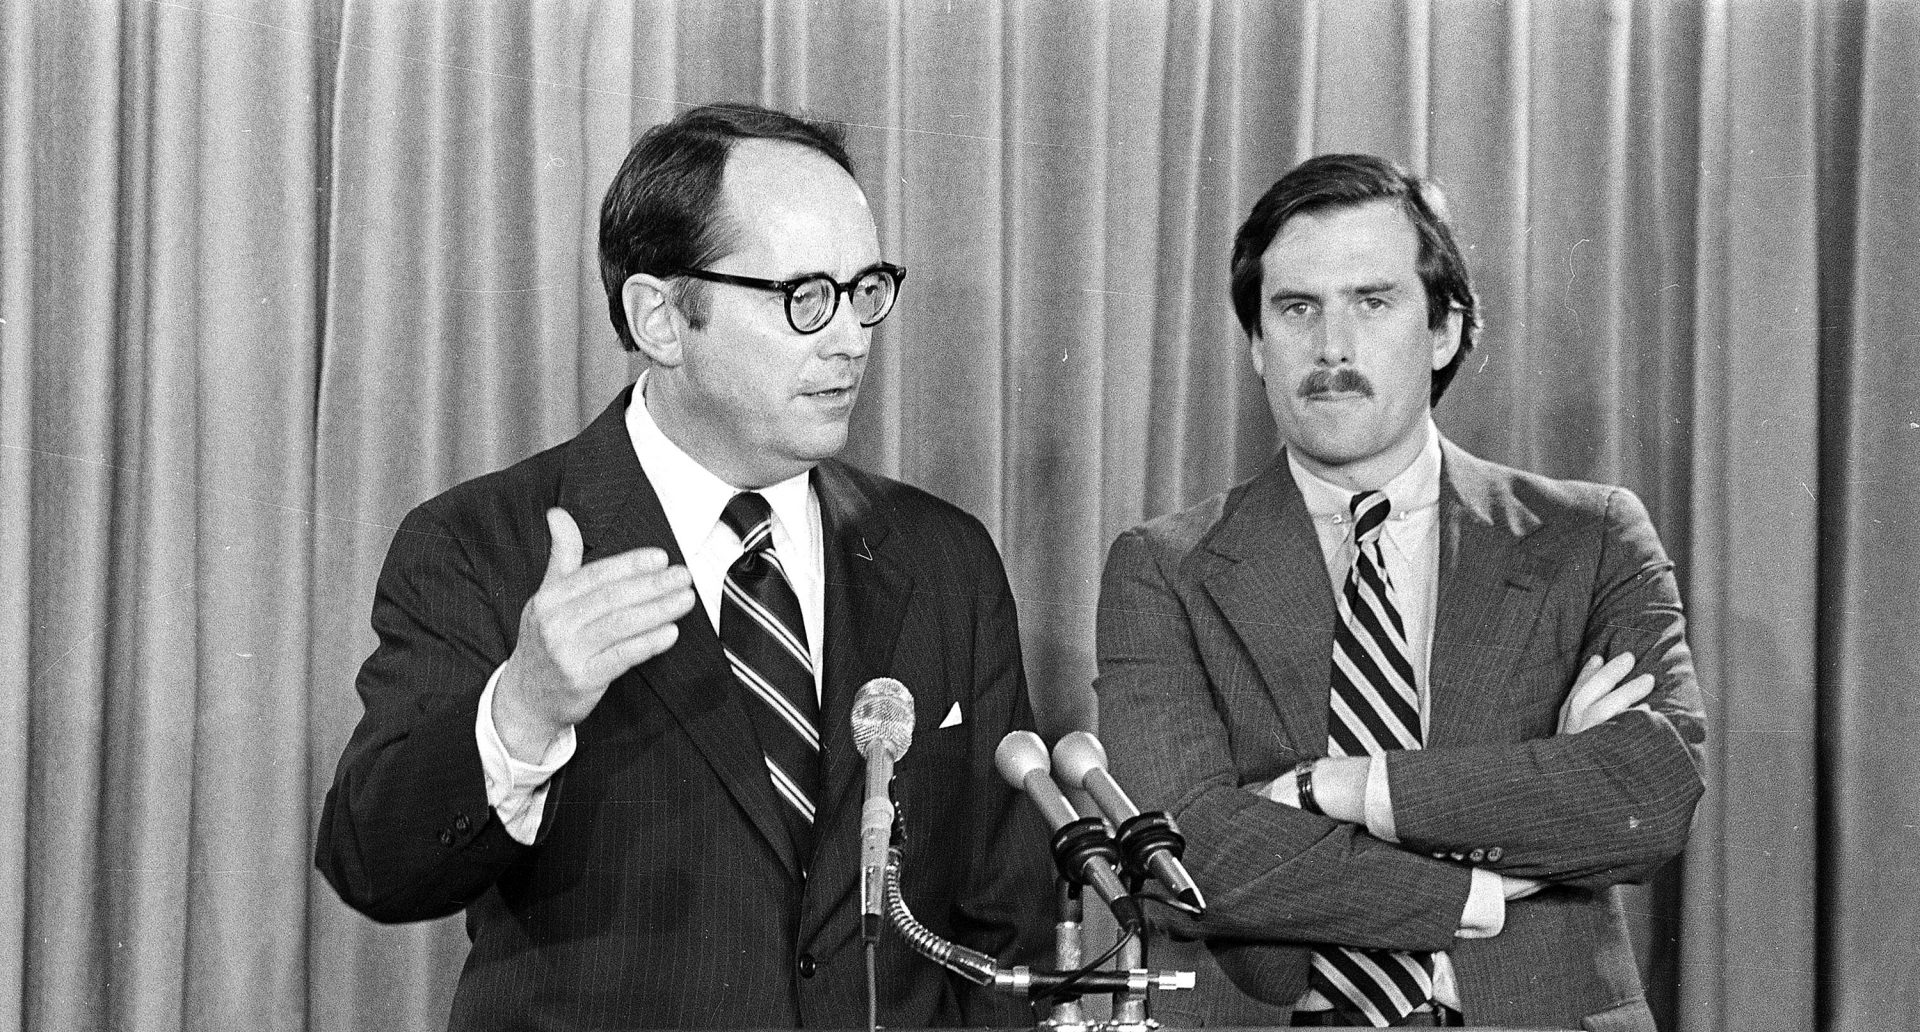 FILE PHOTO: Pennsylvania Governor Dick Thornburgh, left, announces the closing of schools in the area around the Three Mile Island PWR, on March 30, 1979, in Harrisburg, Pa., after an accident at the nuclear power plant led to the release of radioactive gas from the reactor into the atmosphere. The governor advised the evacuation of small children and pregnant women. Standing at right is Lt. Gov. William Scranton.